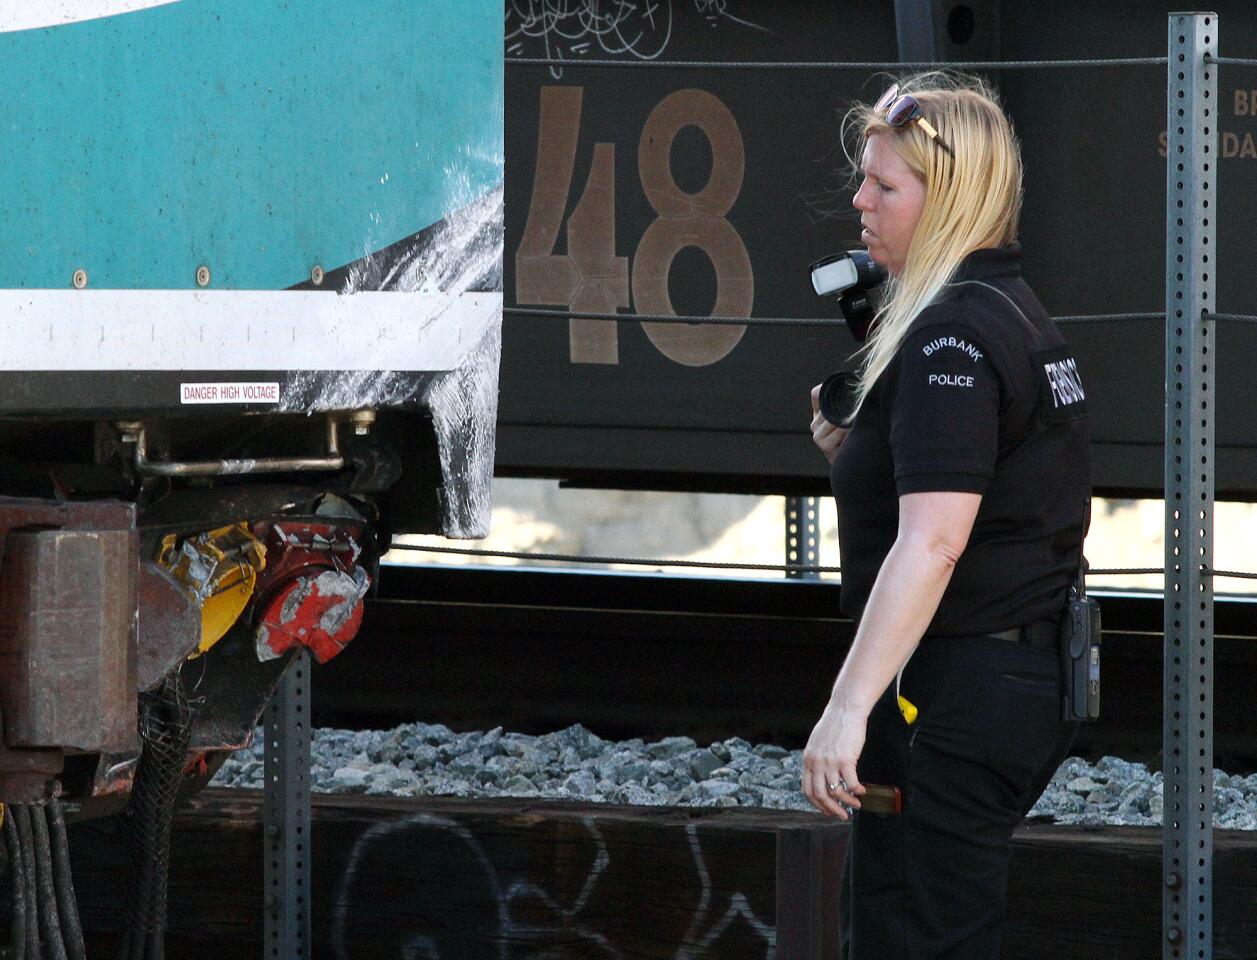 A forensics officer with the Burbank Police Department looks at the damage to the front of a Metrolink train after colliding with a motorist at the intersection of San Fernando and Buena Vista in Burbank on Monday, September 2, 2014. There was one driver taken to the hospital in critical condition, and six were injured on the train.